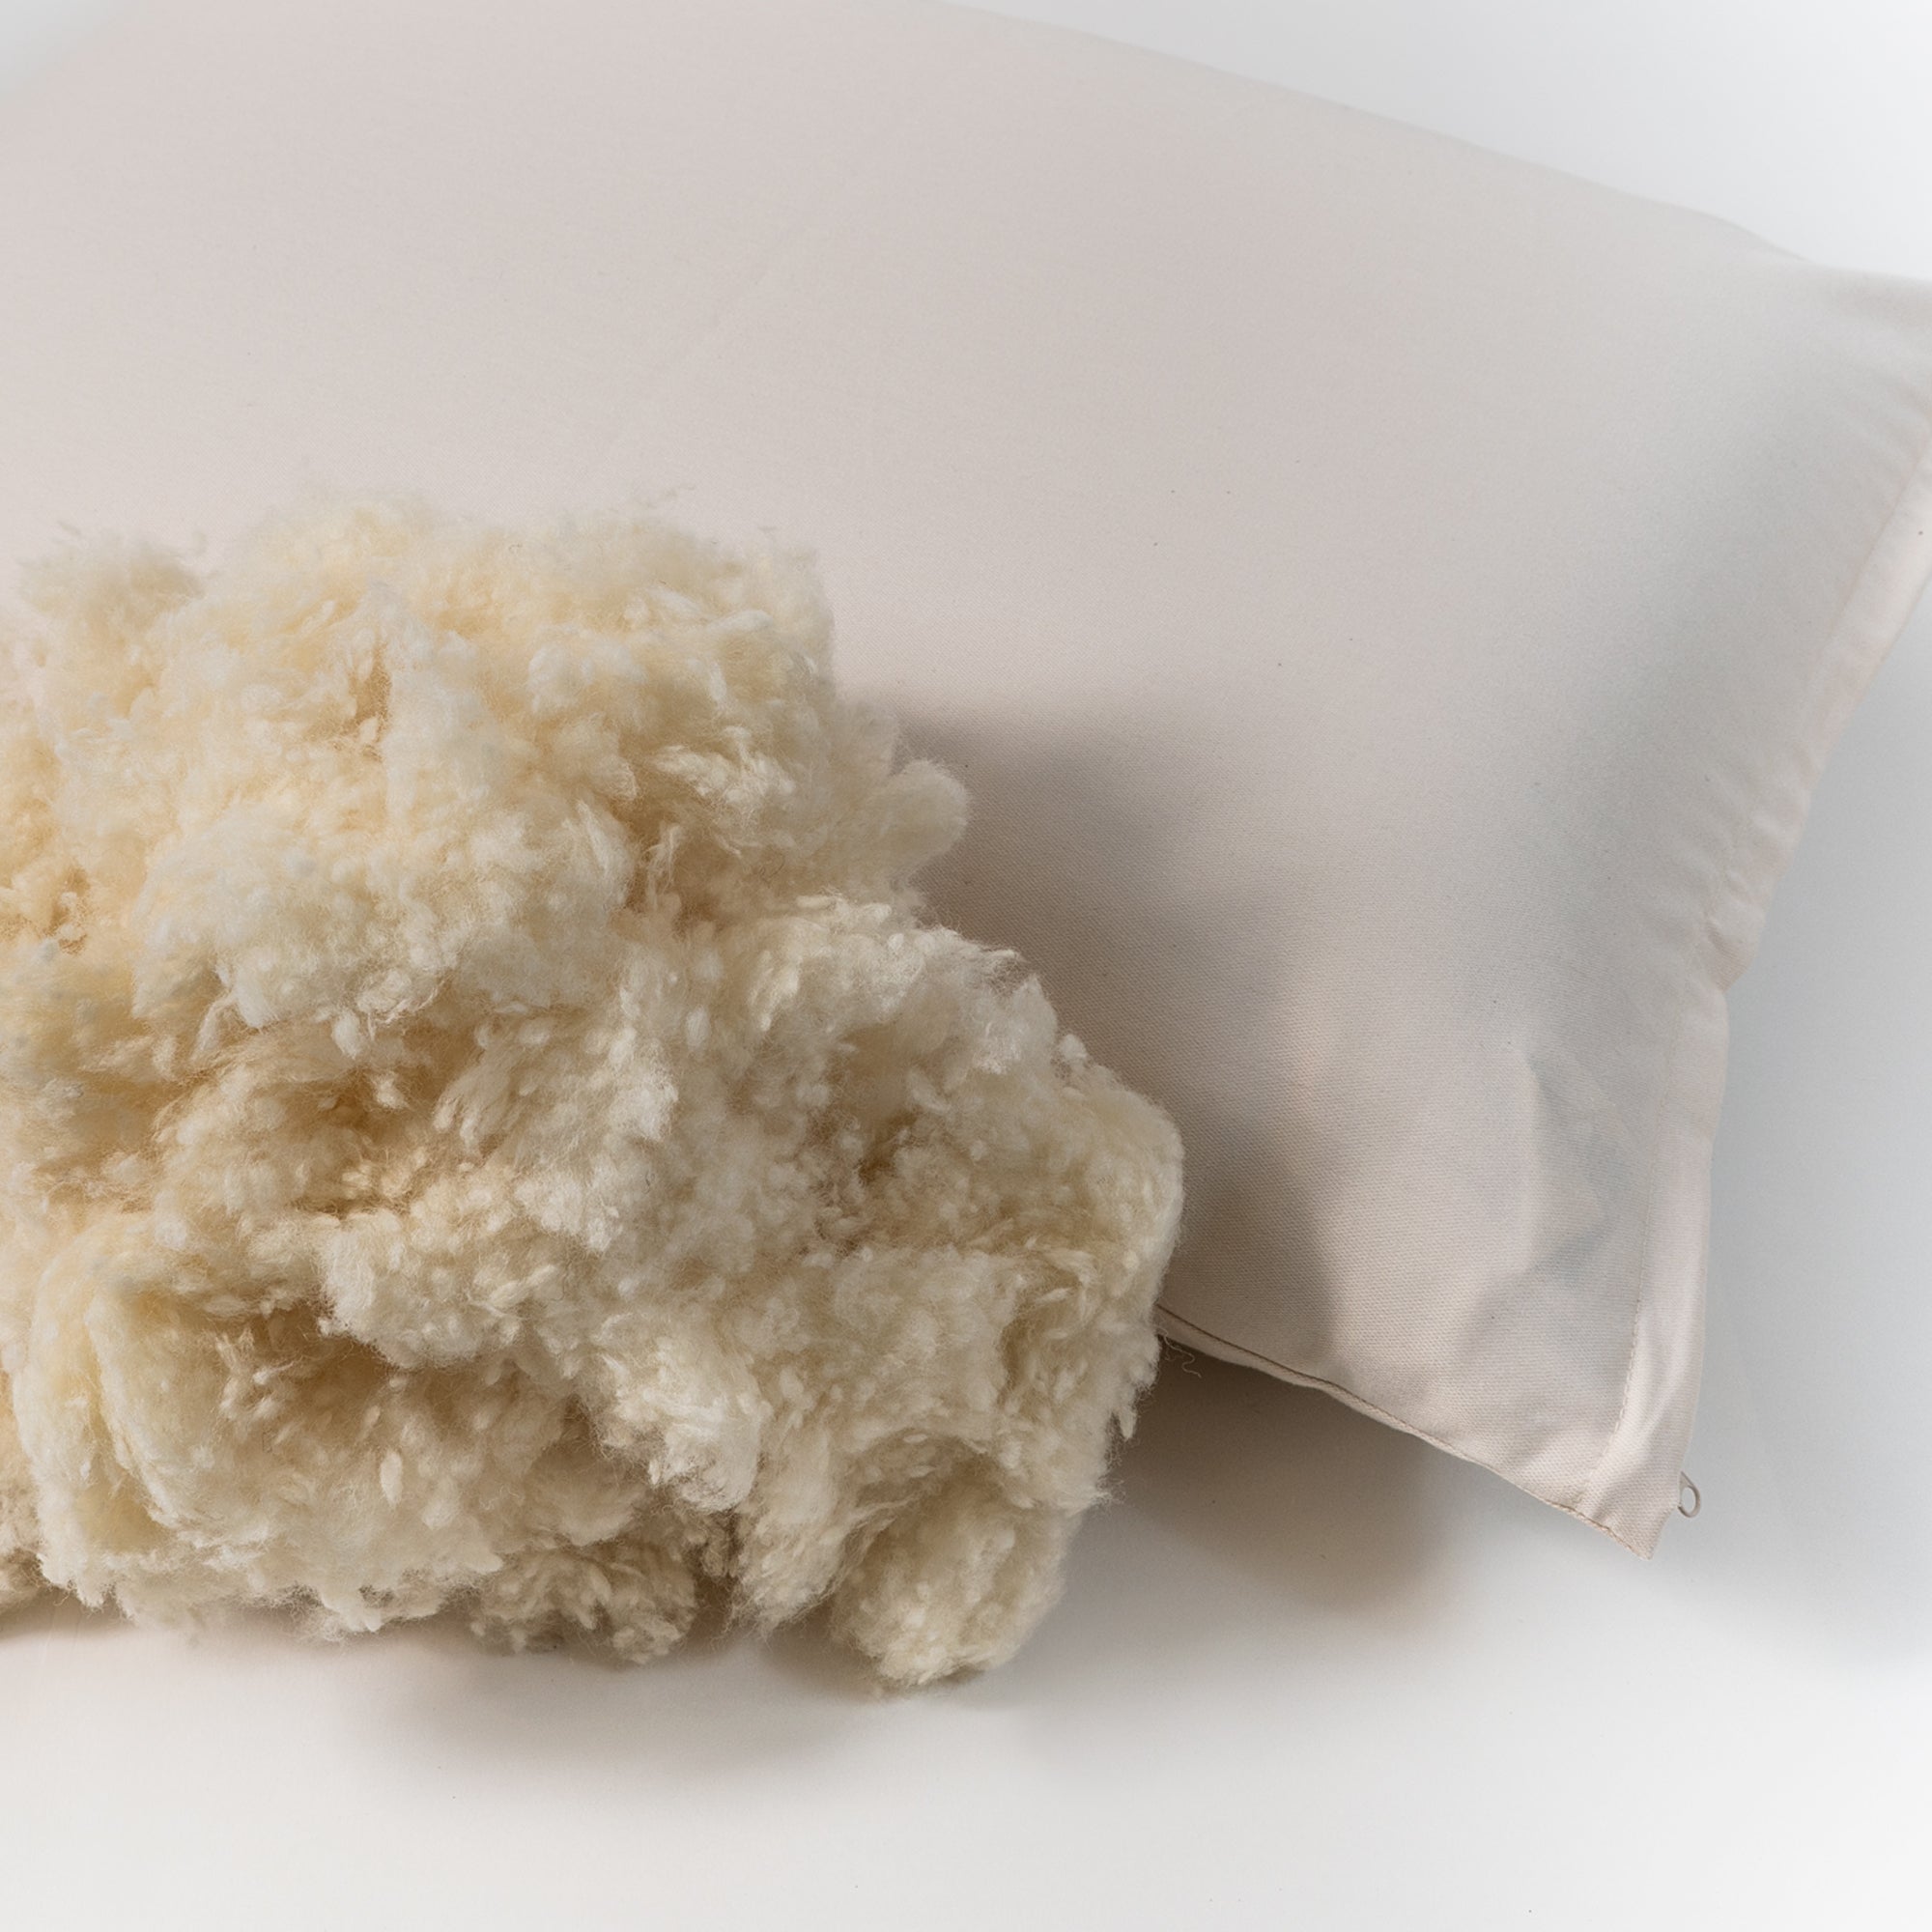 Natural wooly bolas pillow. Covered in a sateen fabric of organic cotton fibers.